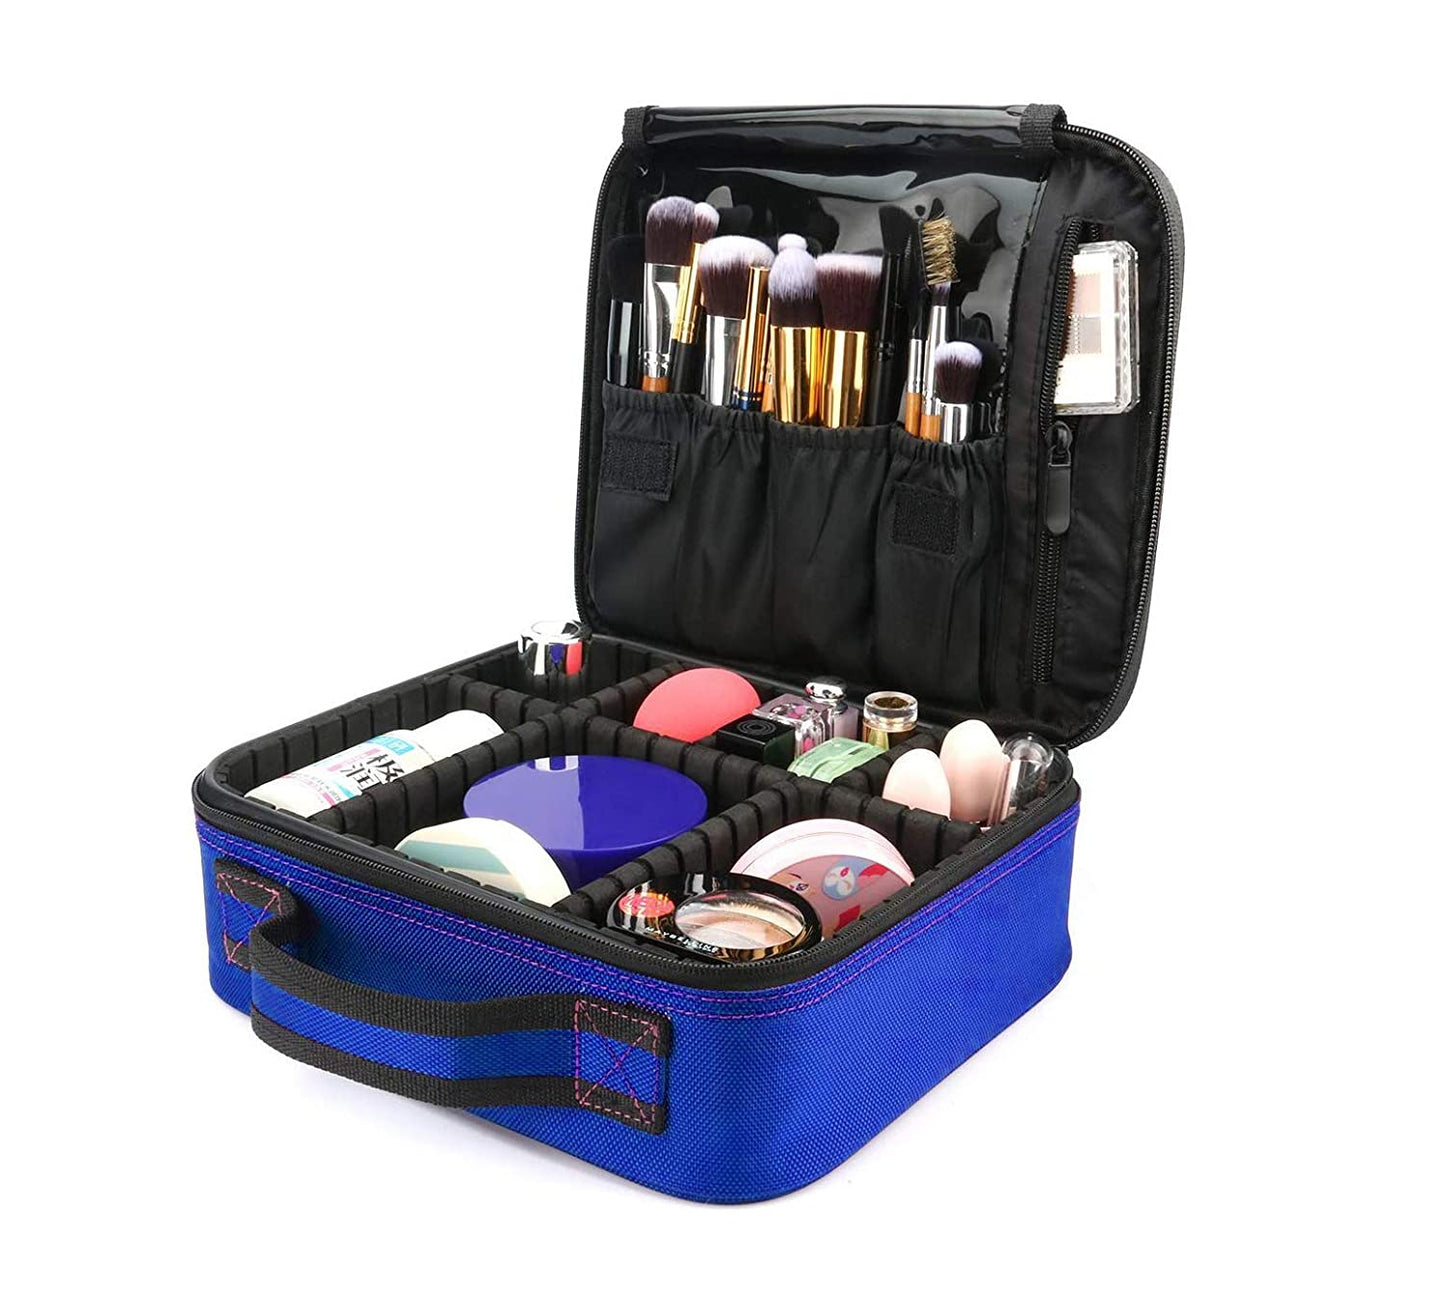 Makeup Cosmetic Storage Case with Adjustable Compartment - Dark Blue